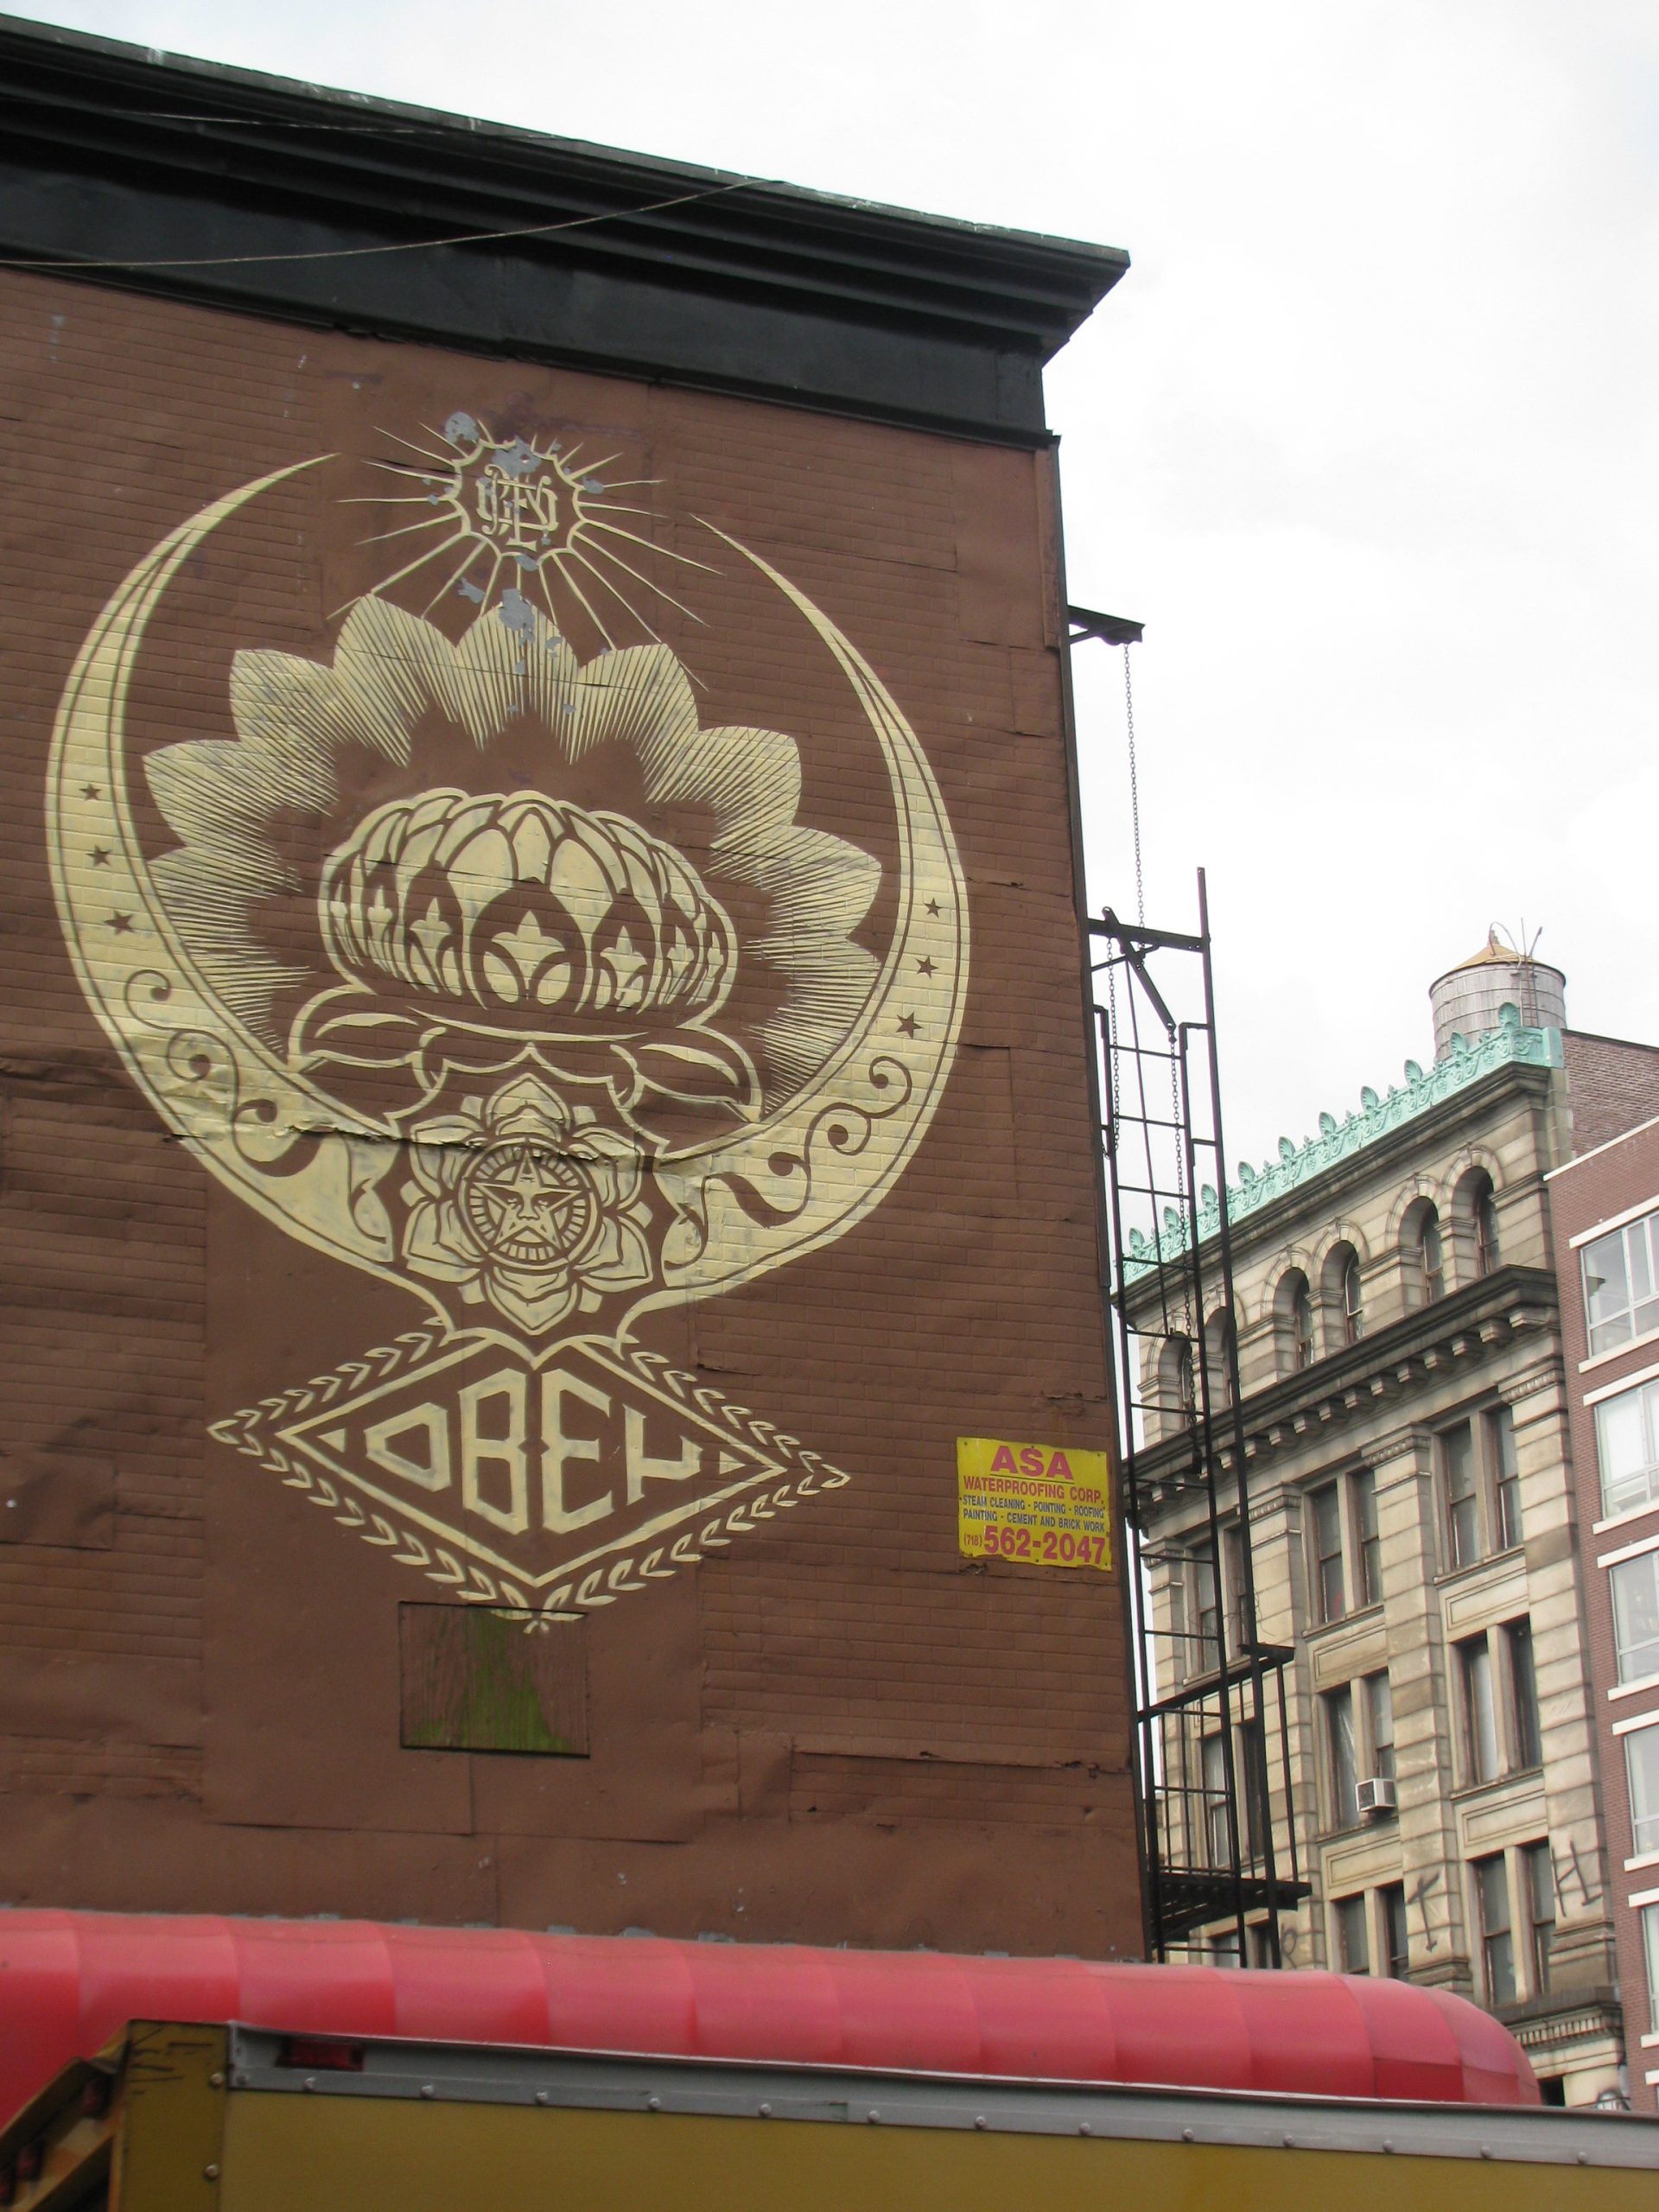 Obey on Bowery